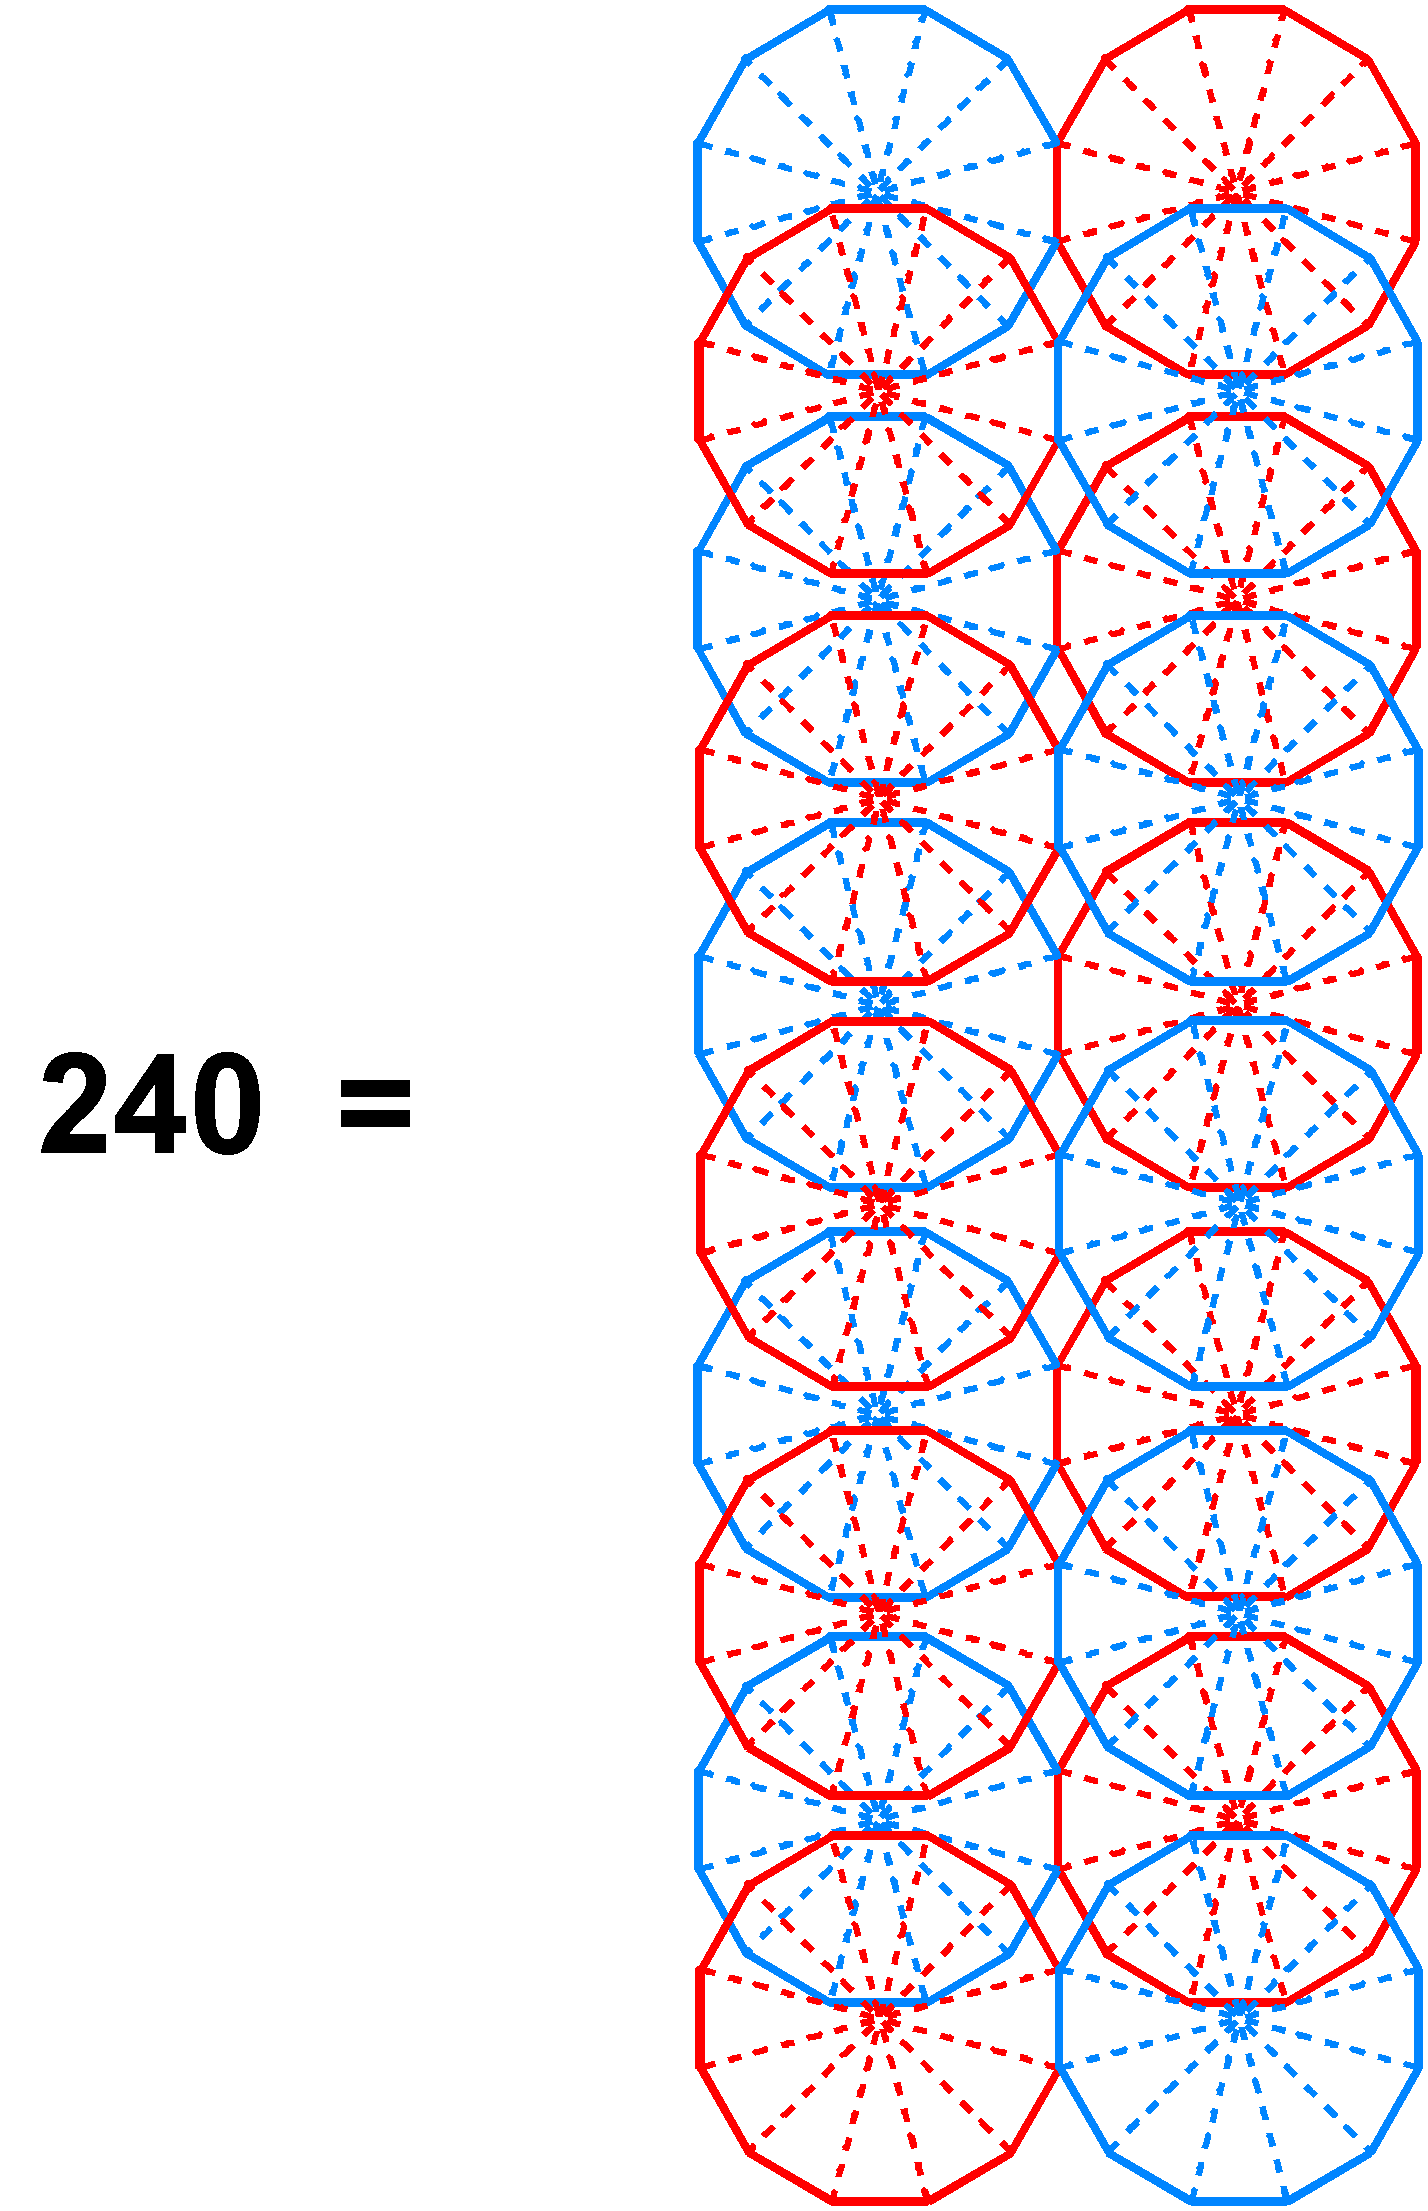 240 corners of dodecagons enfolded in 10-tree